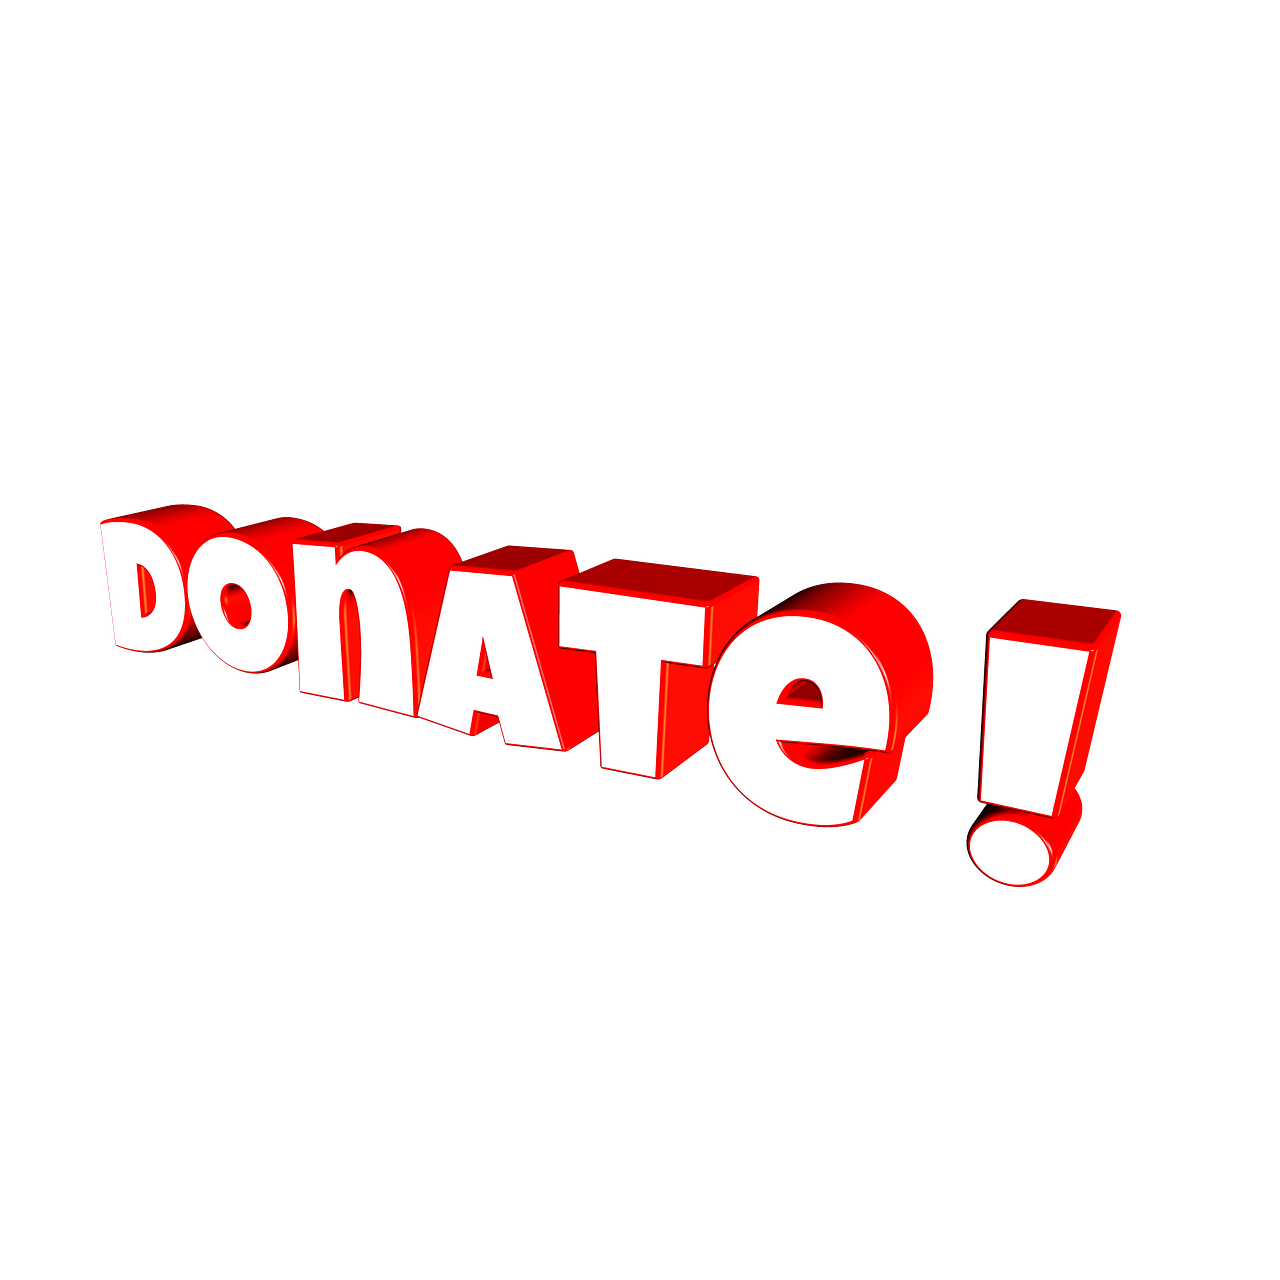 donation font lettering free photo